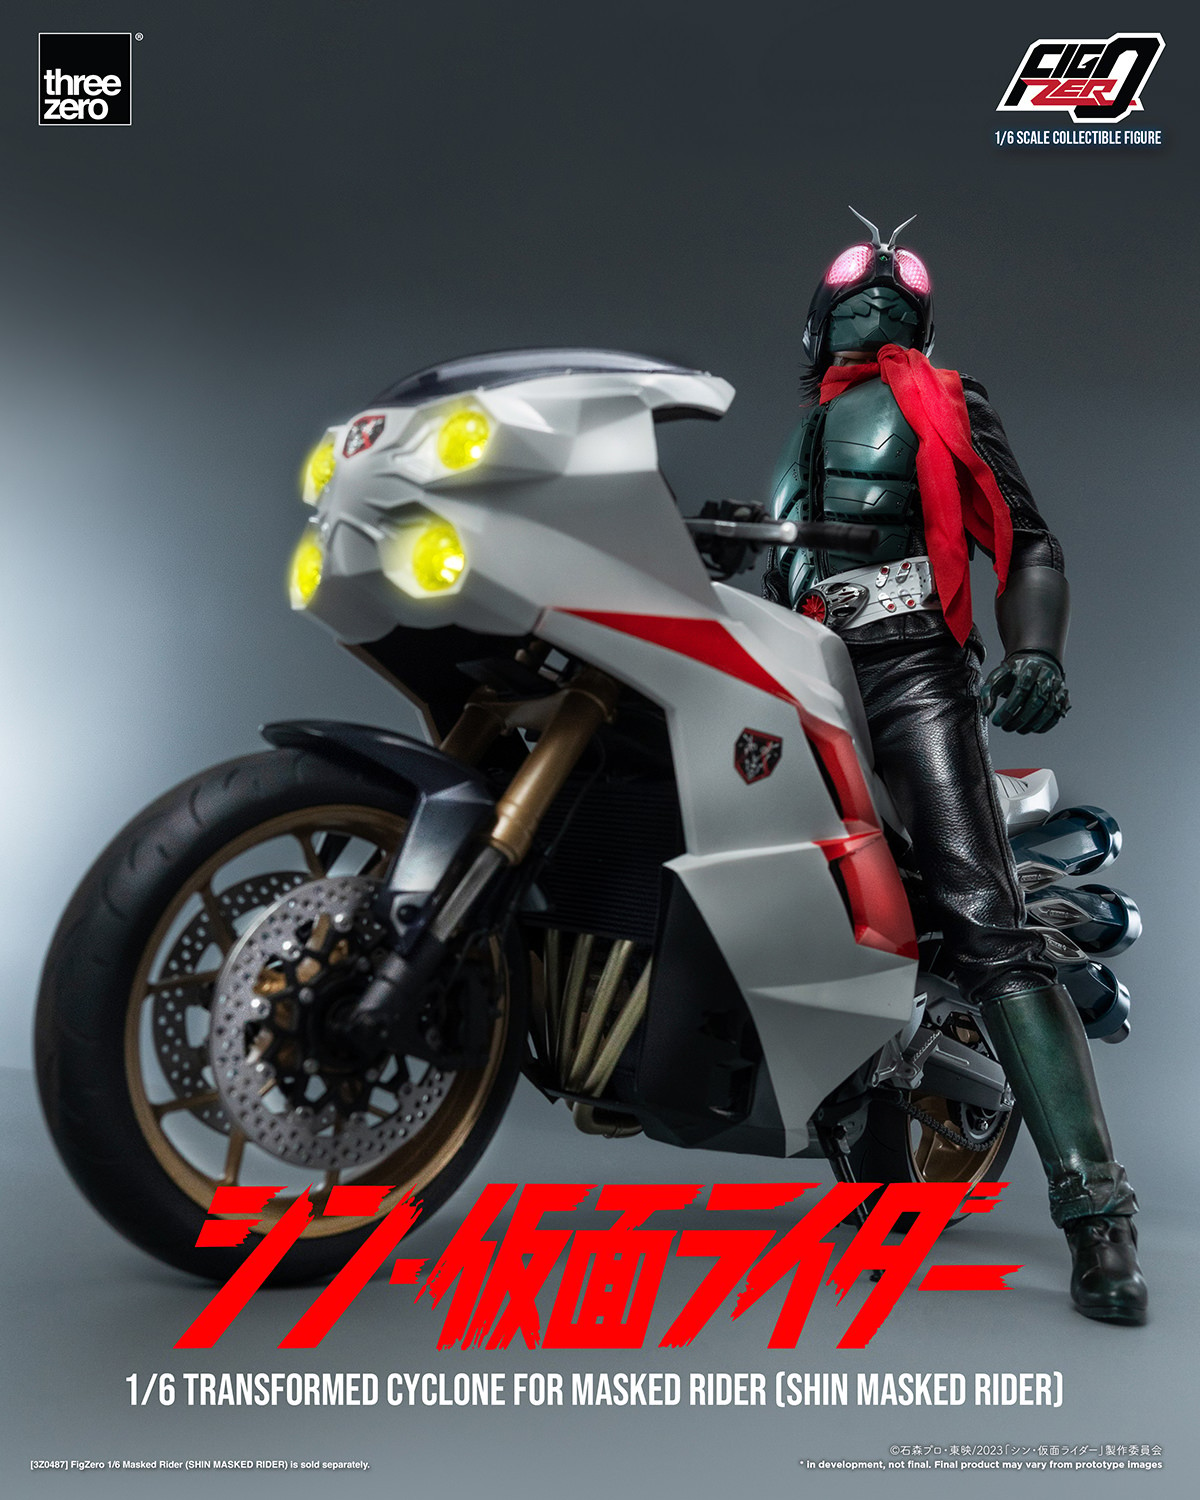 Transformed Cyclone for Masked Rider (Shin Masked Rider) (Prototype Shown) View 17